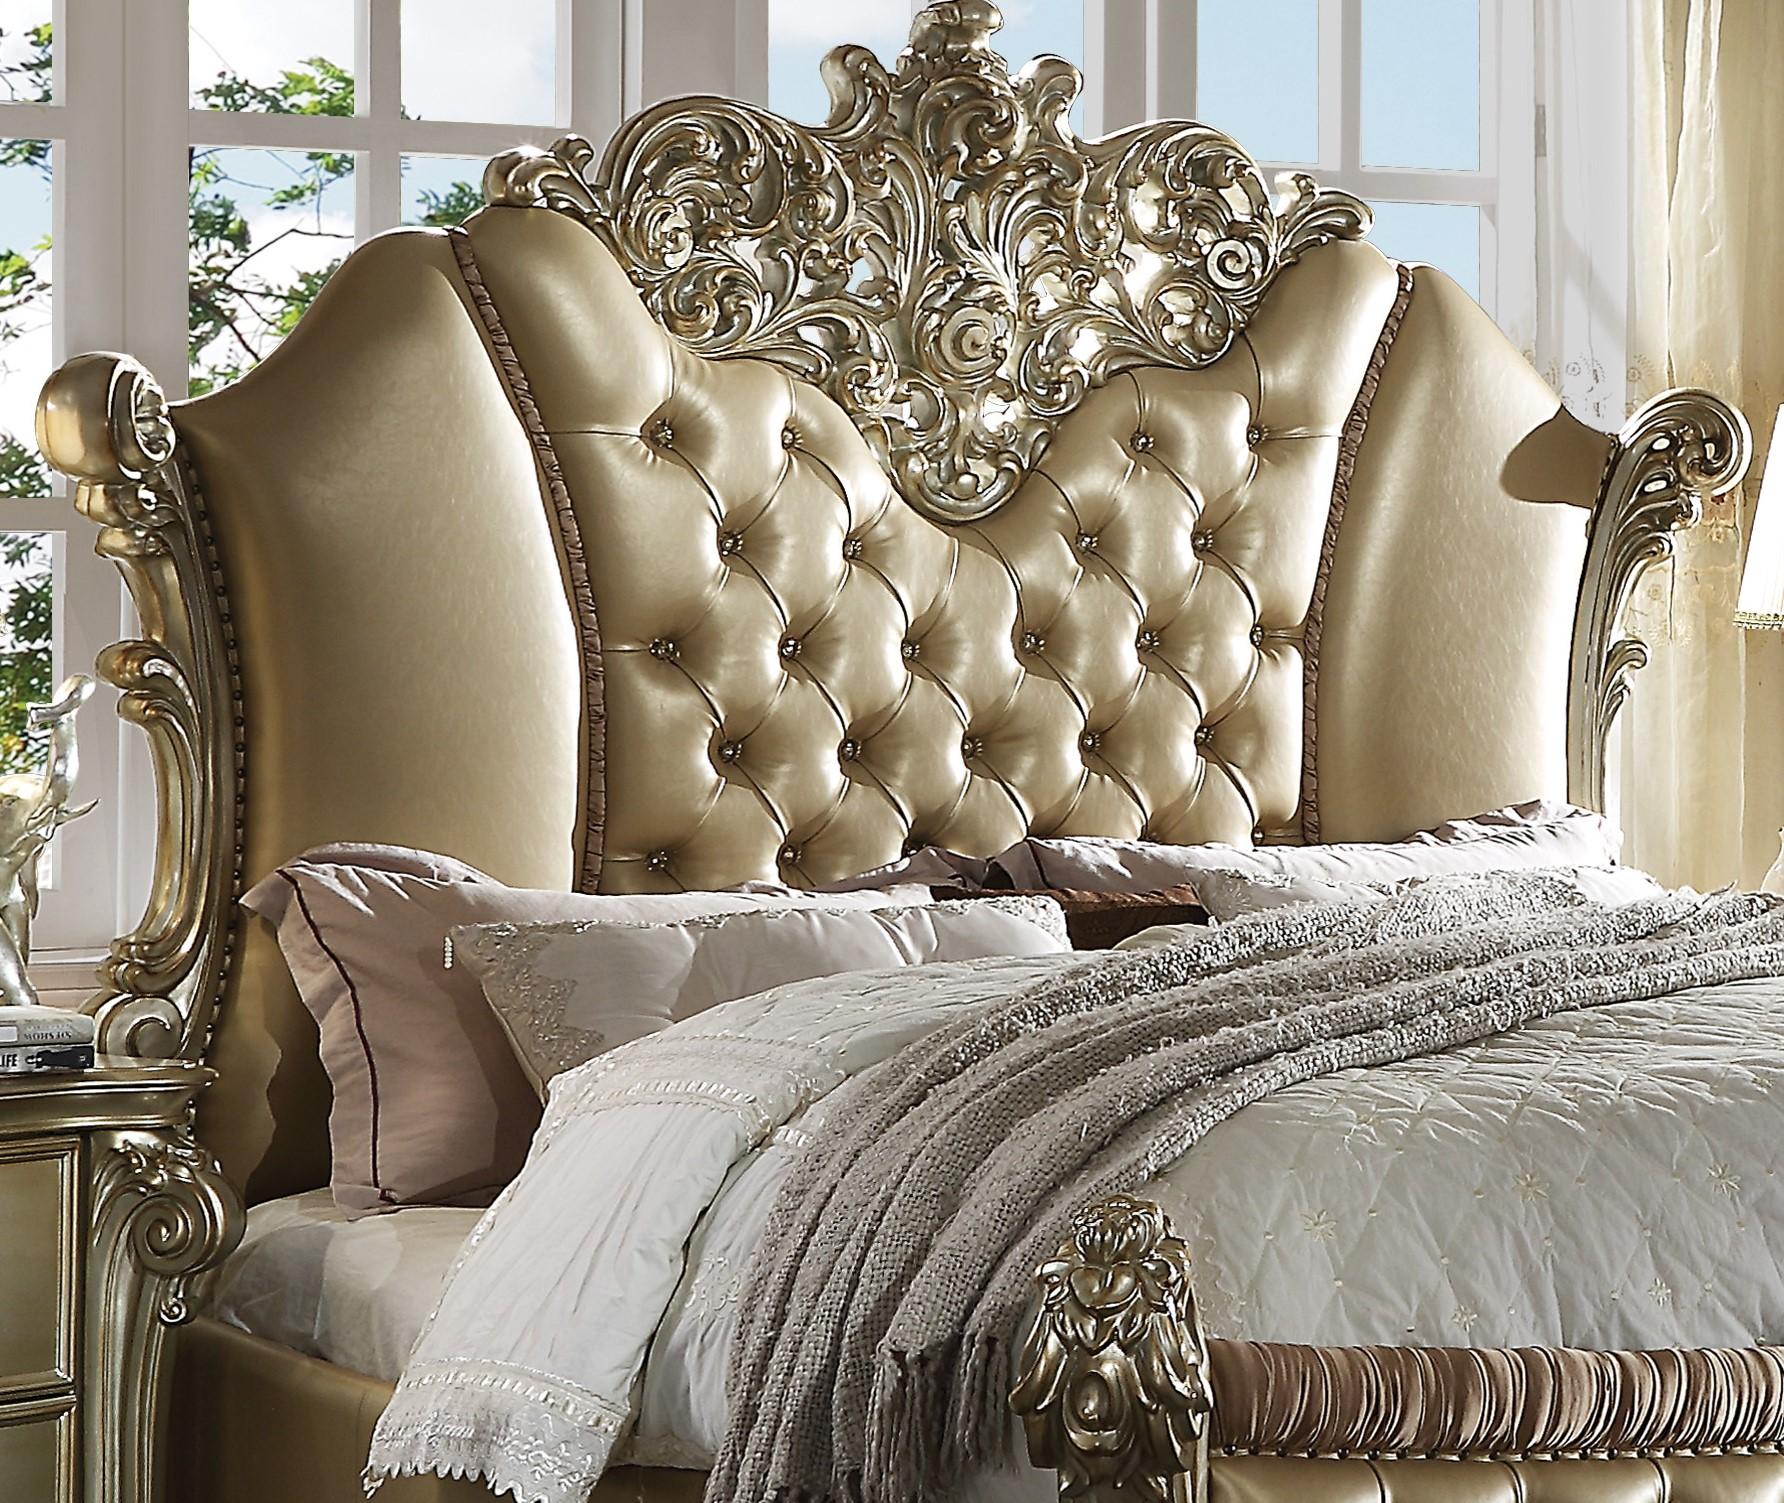 

    
Bone & Gold Patina Upholstered Queen Bed Vendome II-28030Q  Acme Traditional
